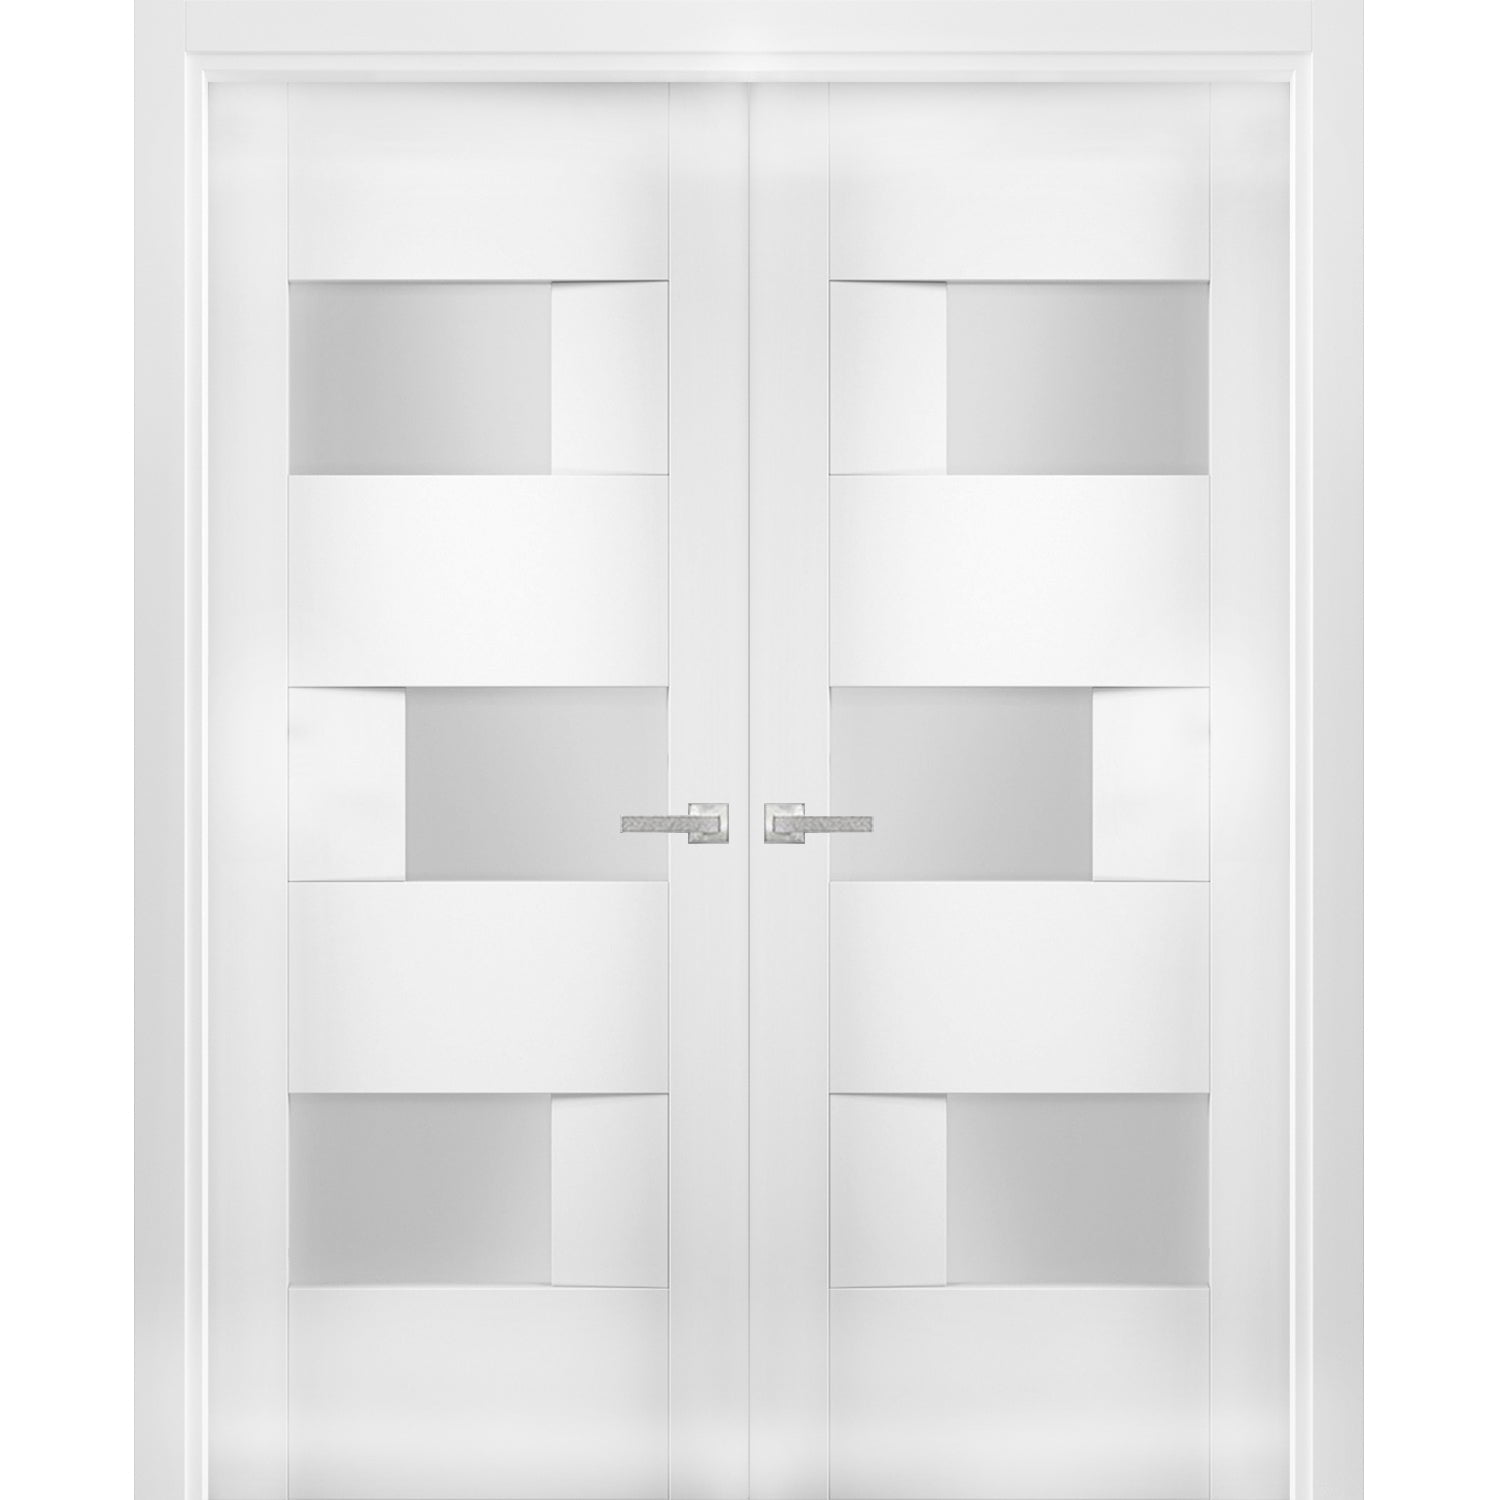 Solid French Double Doors 60 x 84 inches Opaque Glass / Sete 6933 White ...